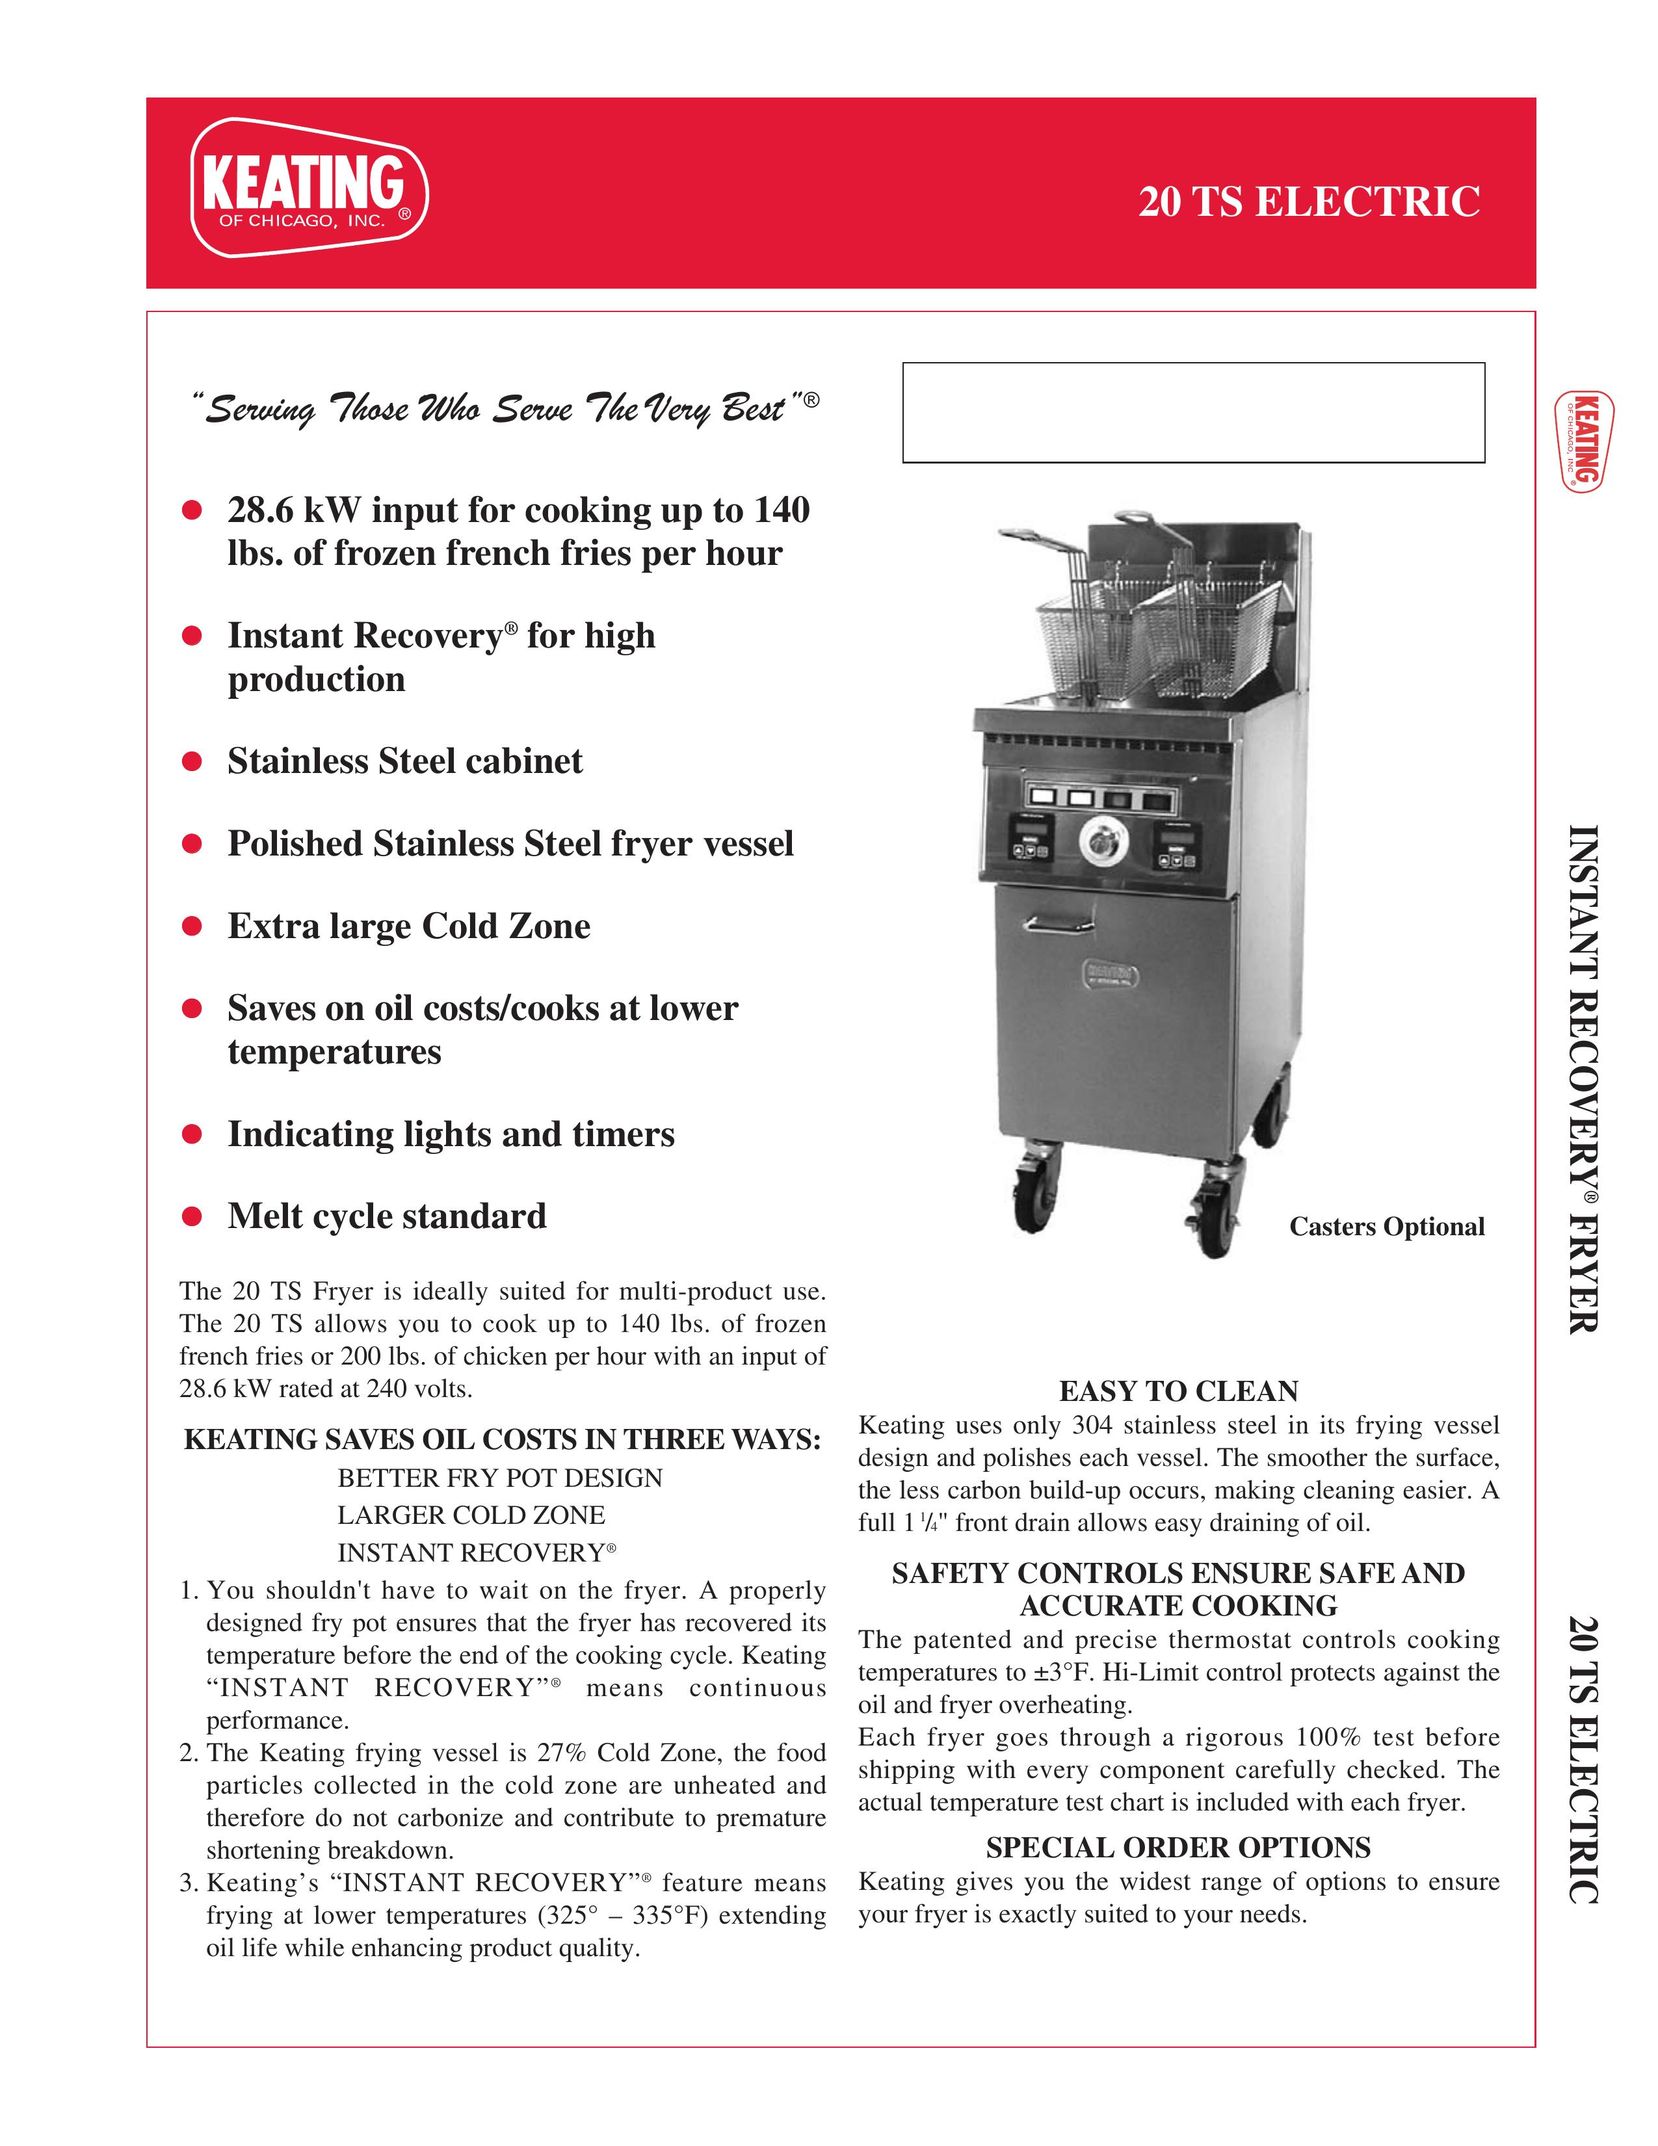 Keating Of Chicago 20 TS Electric Fryer User Manual